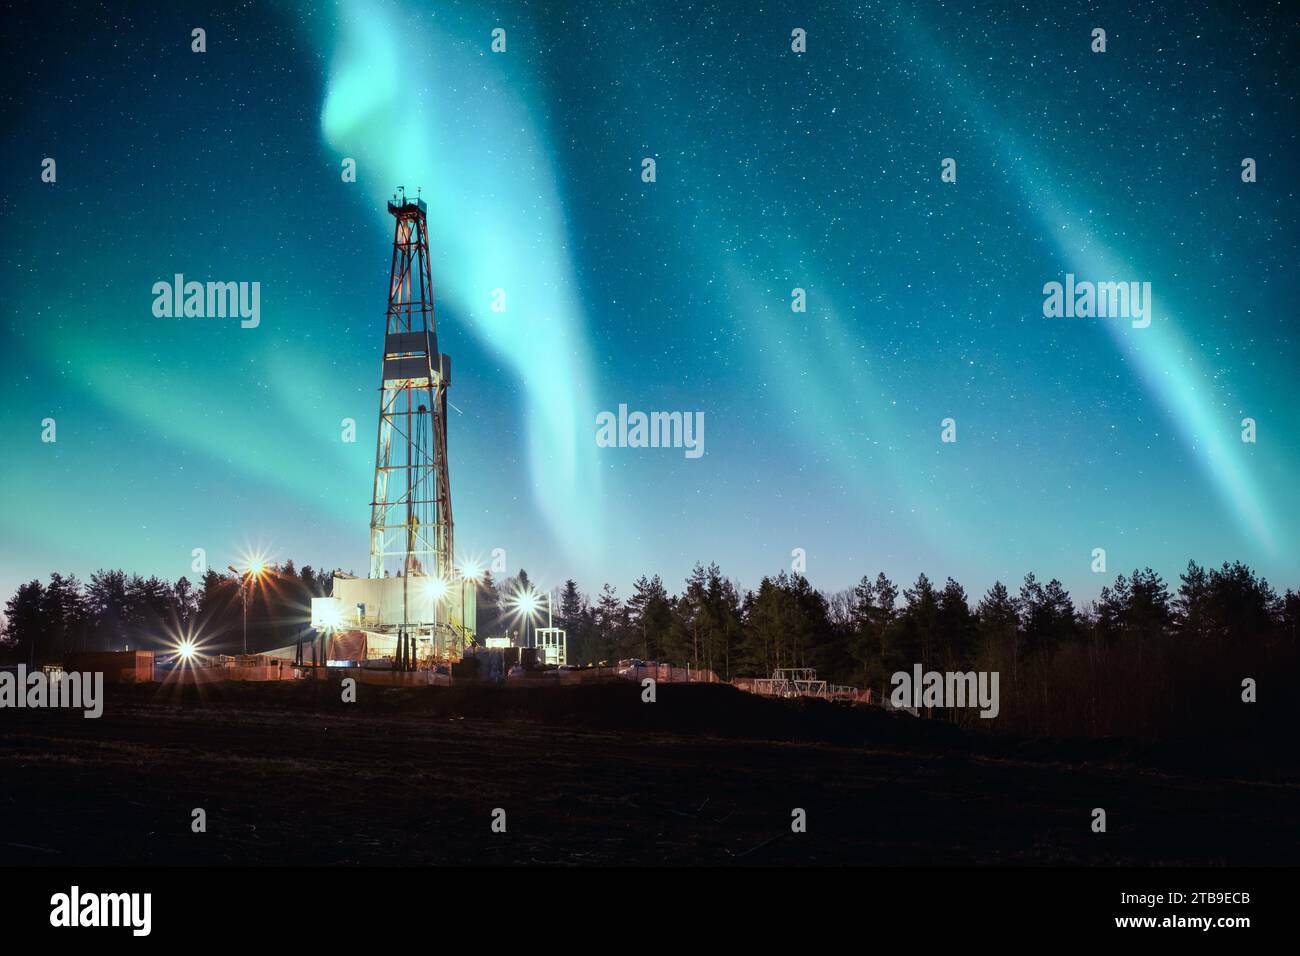 Aurora borealis Northern lights over oil gas drilling rig. Industrial concept Stock Photo